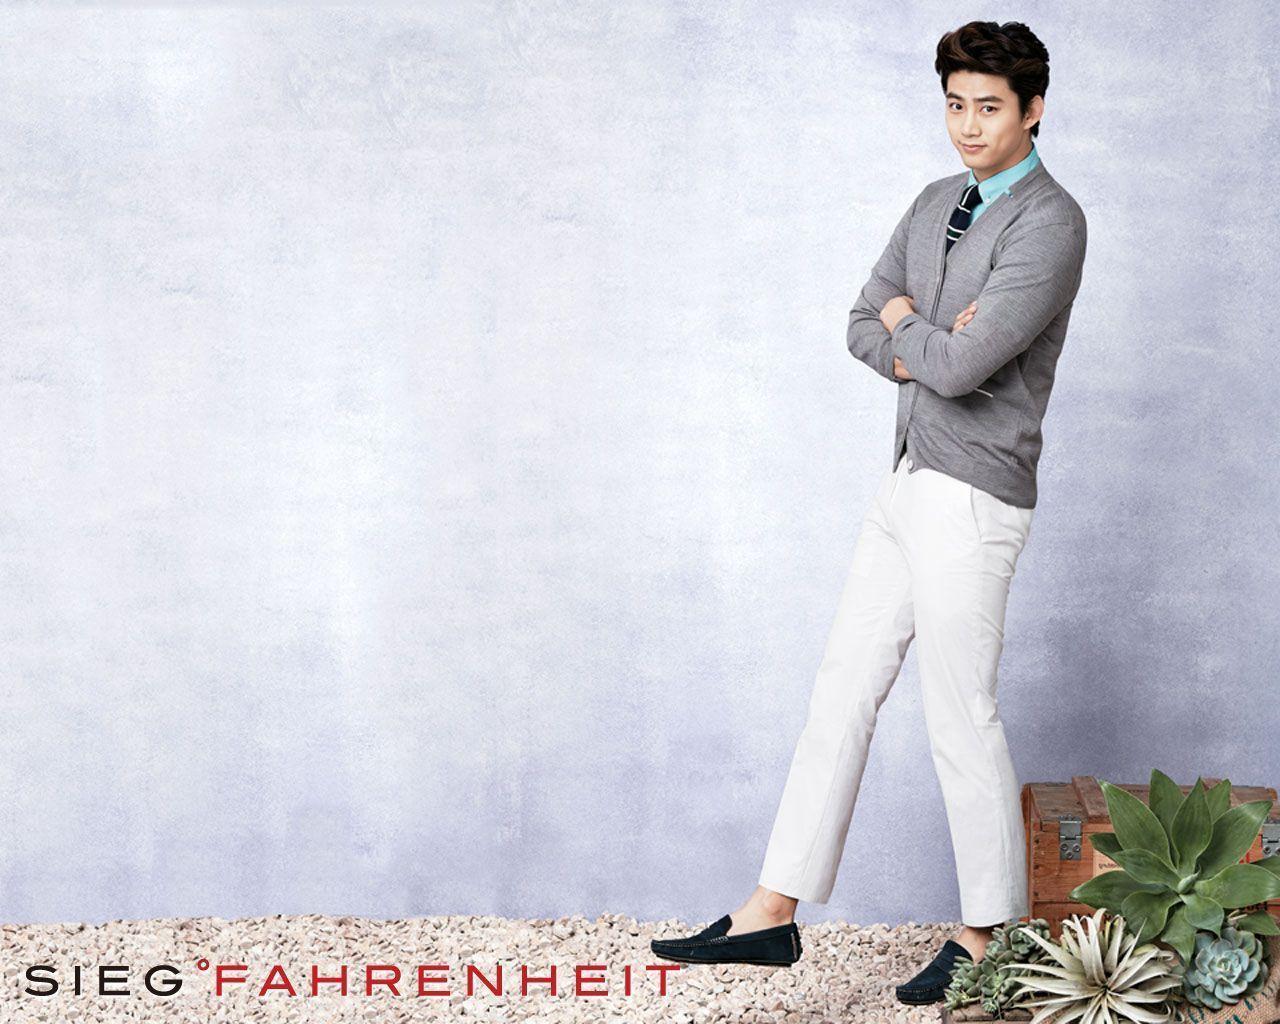 Taecyeon Wallpaper For Your